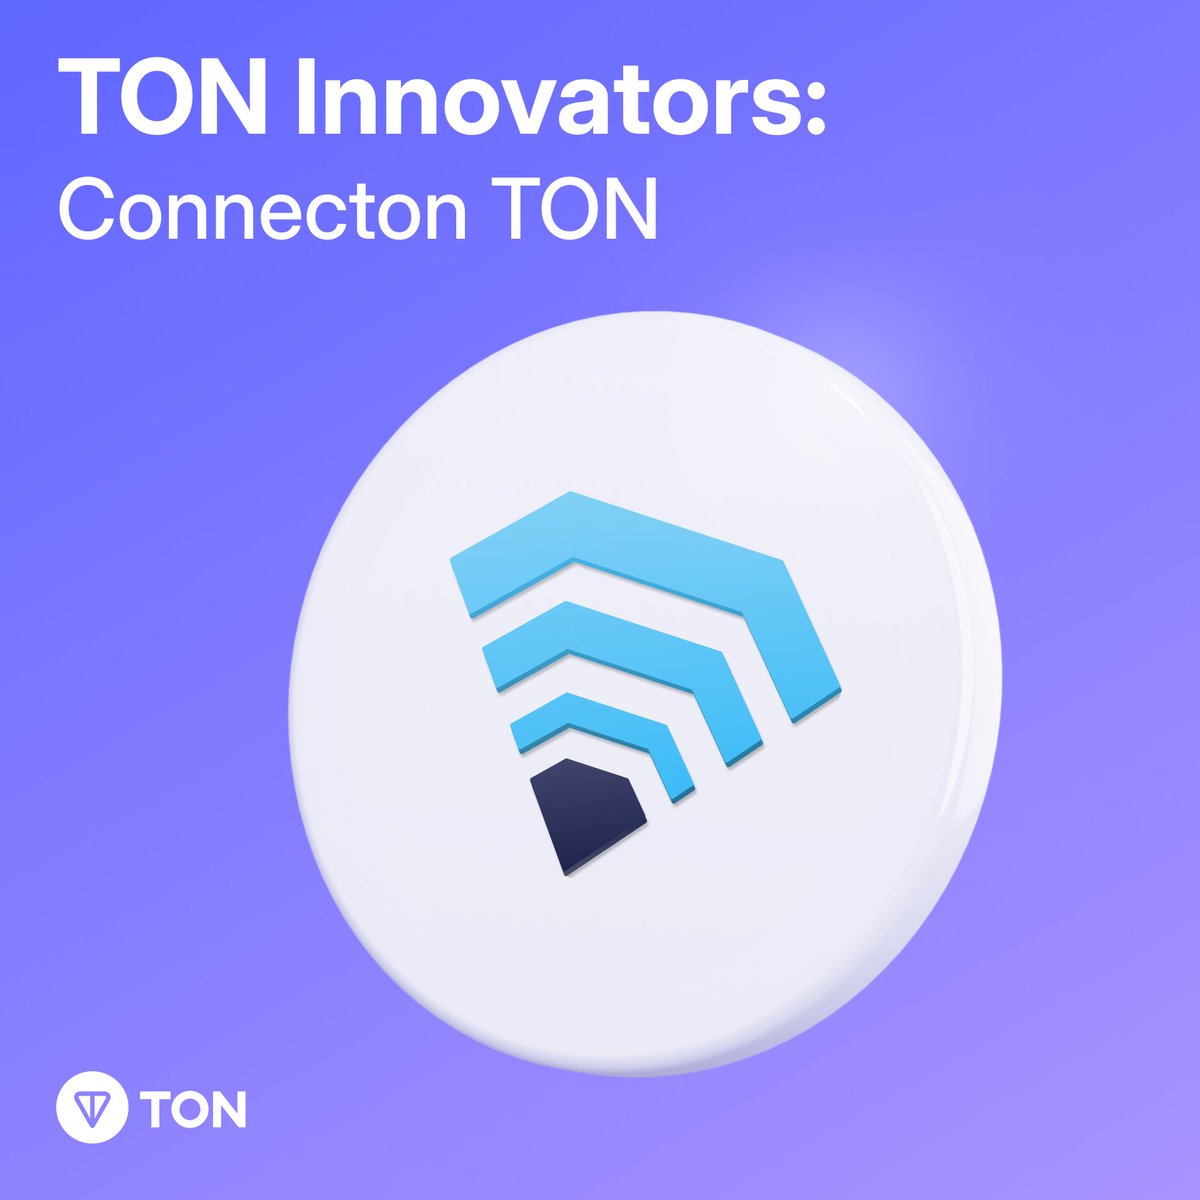 TON Innovators: @ConnectonVPN! 🌐

Connecton VPN is the first VPN service powered by TON Blockchain. They're developing a decentralized VPN protocol with its own native currency on #TON. 💎